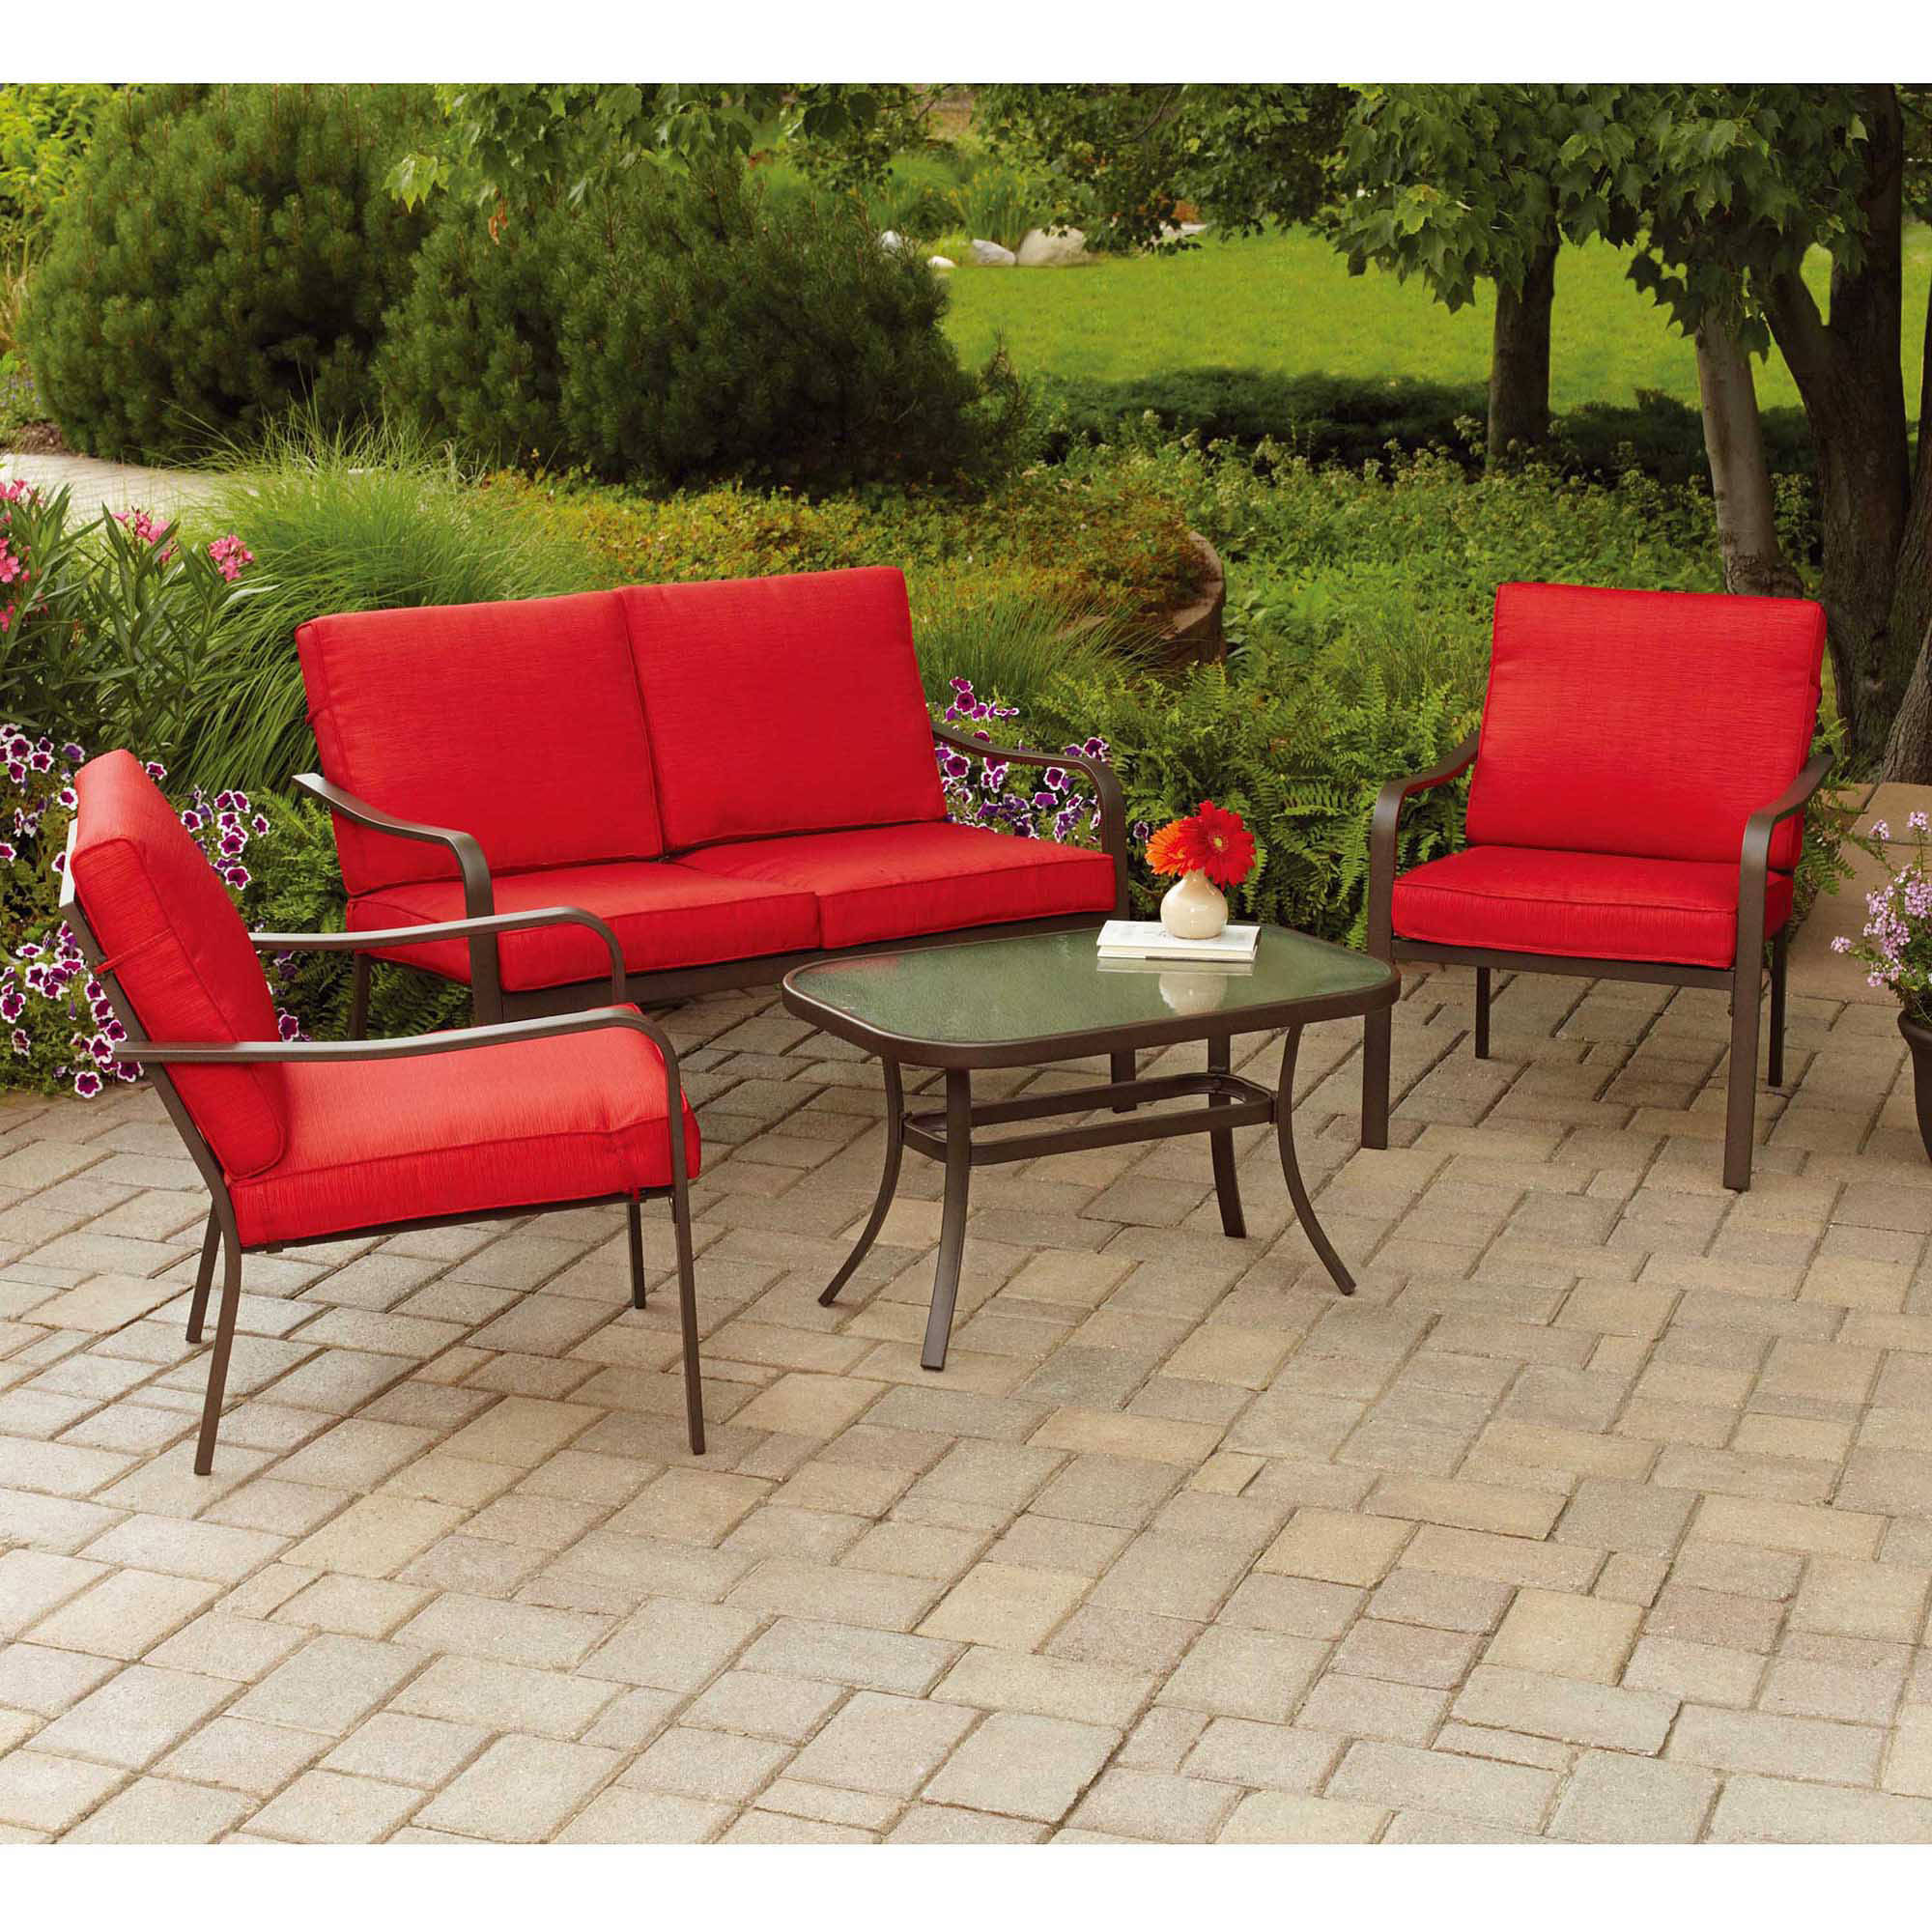 outdoor dining sets for 4 photo - 1